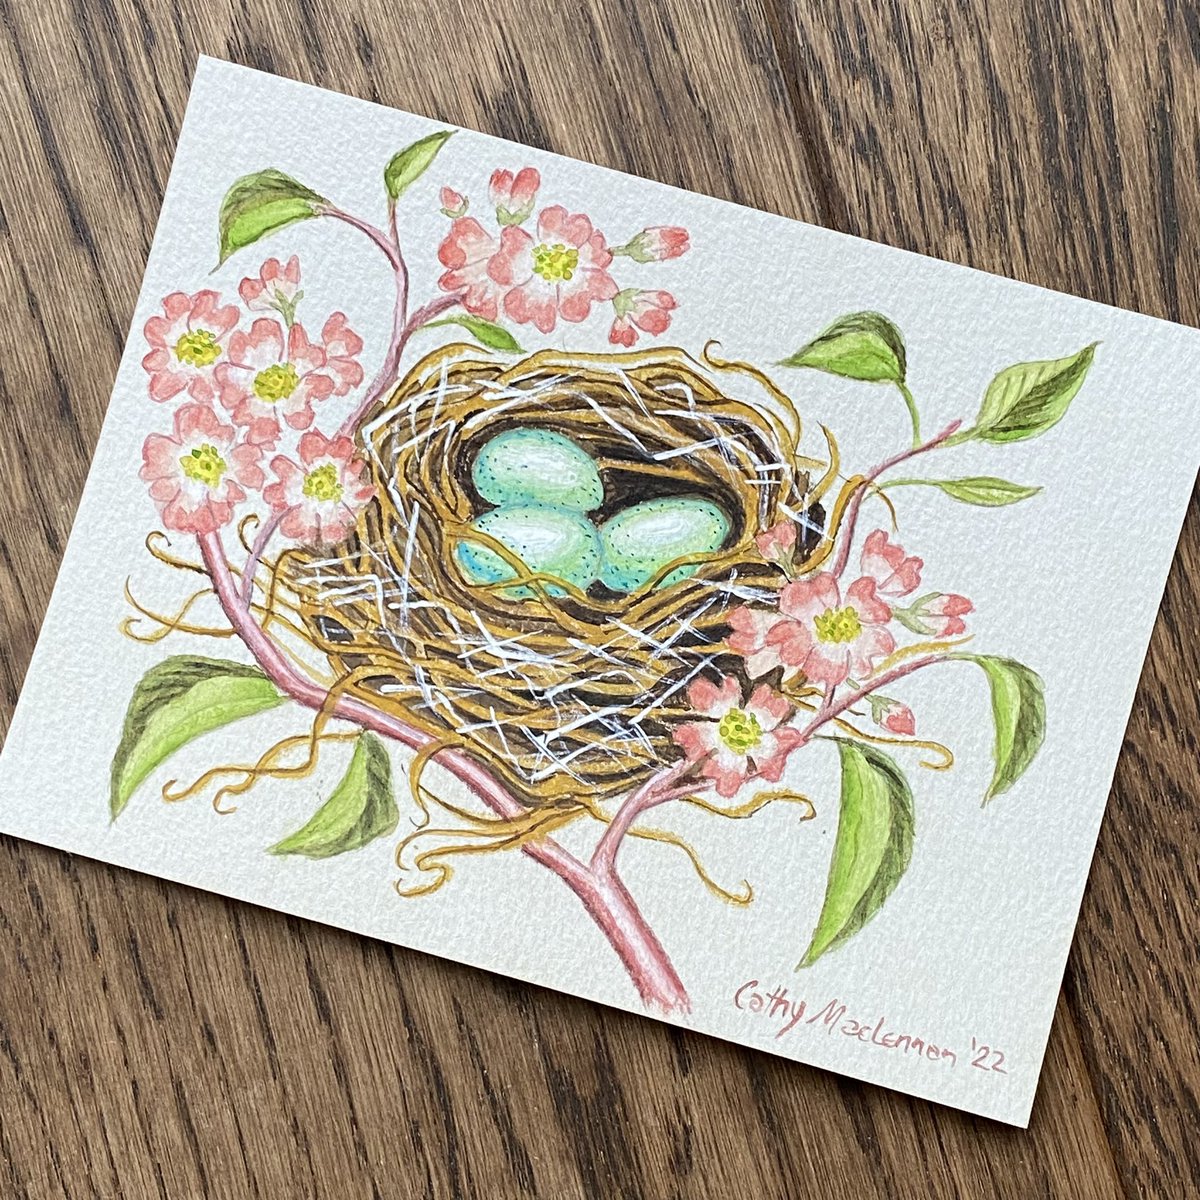 Thank you so much @SweetReunion22 for buying my ‘Nest’ drawing and for supporting the @encephalitis charity and #TAE22 @twitrartexhibit It’s made my day! 🥳😊